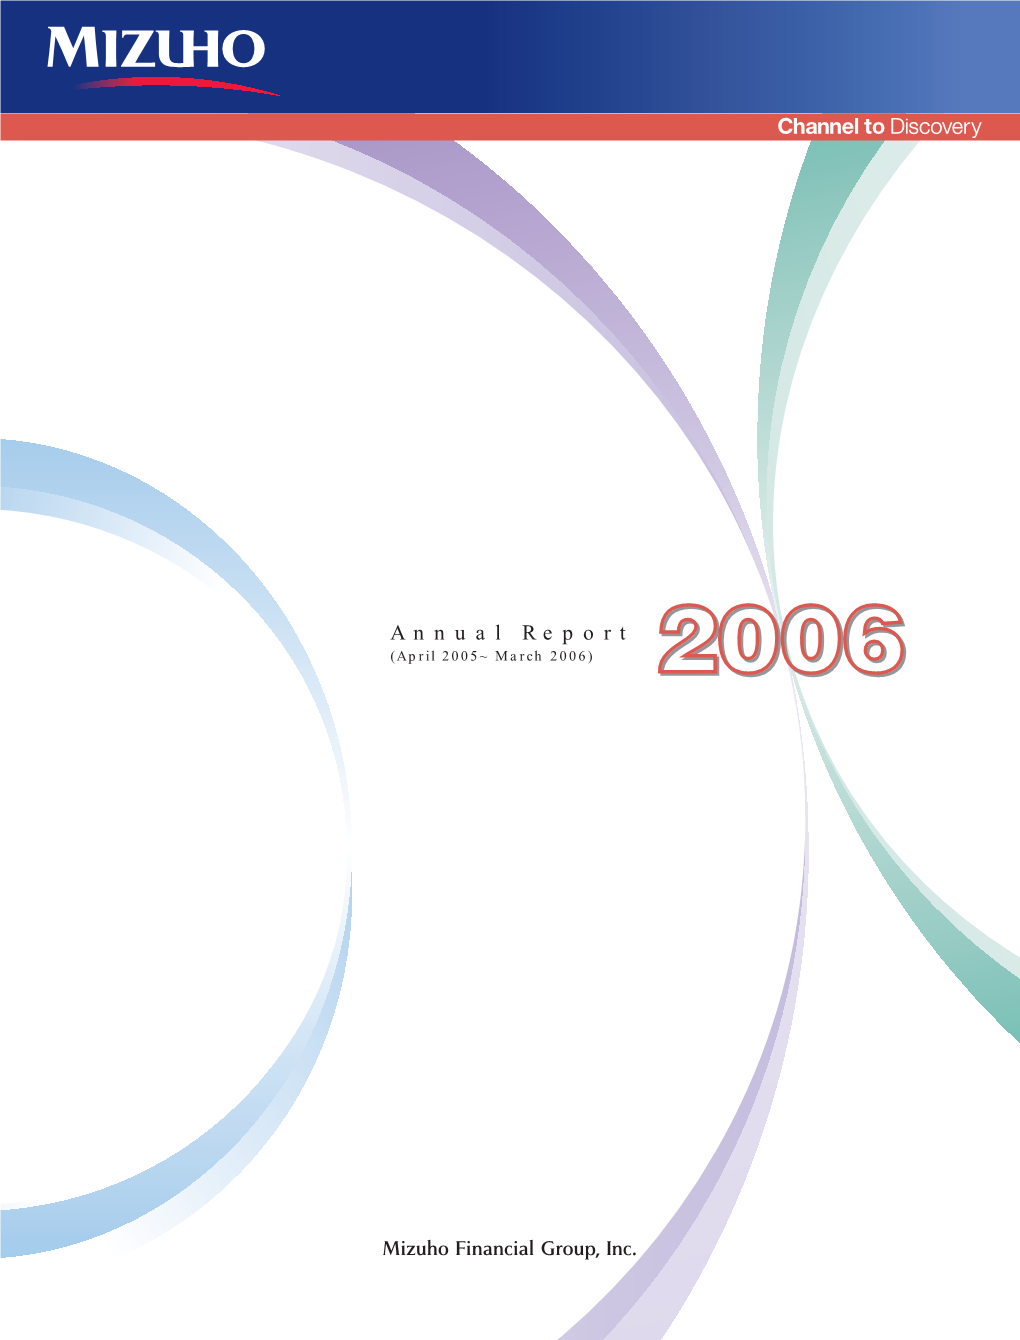 Annual Report (April 2005~ March 2006) Financial Highlights of Mizuho Financial Group, Inc